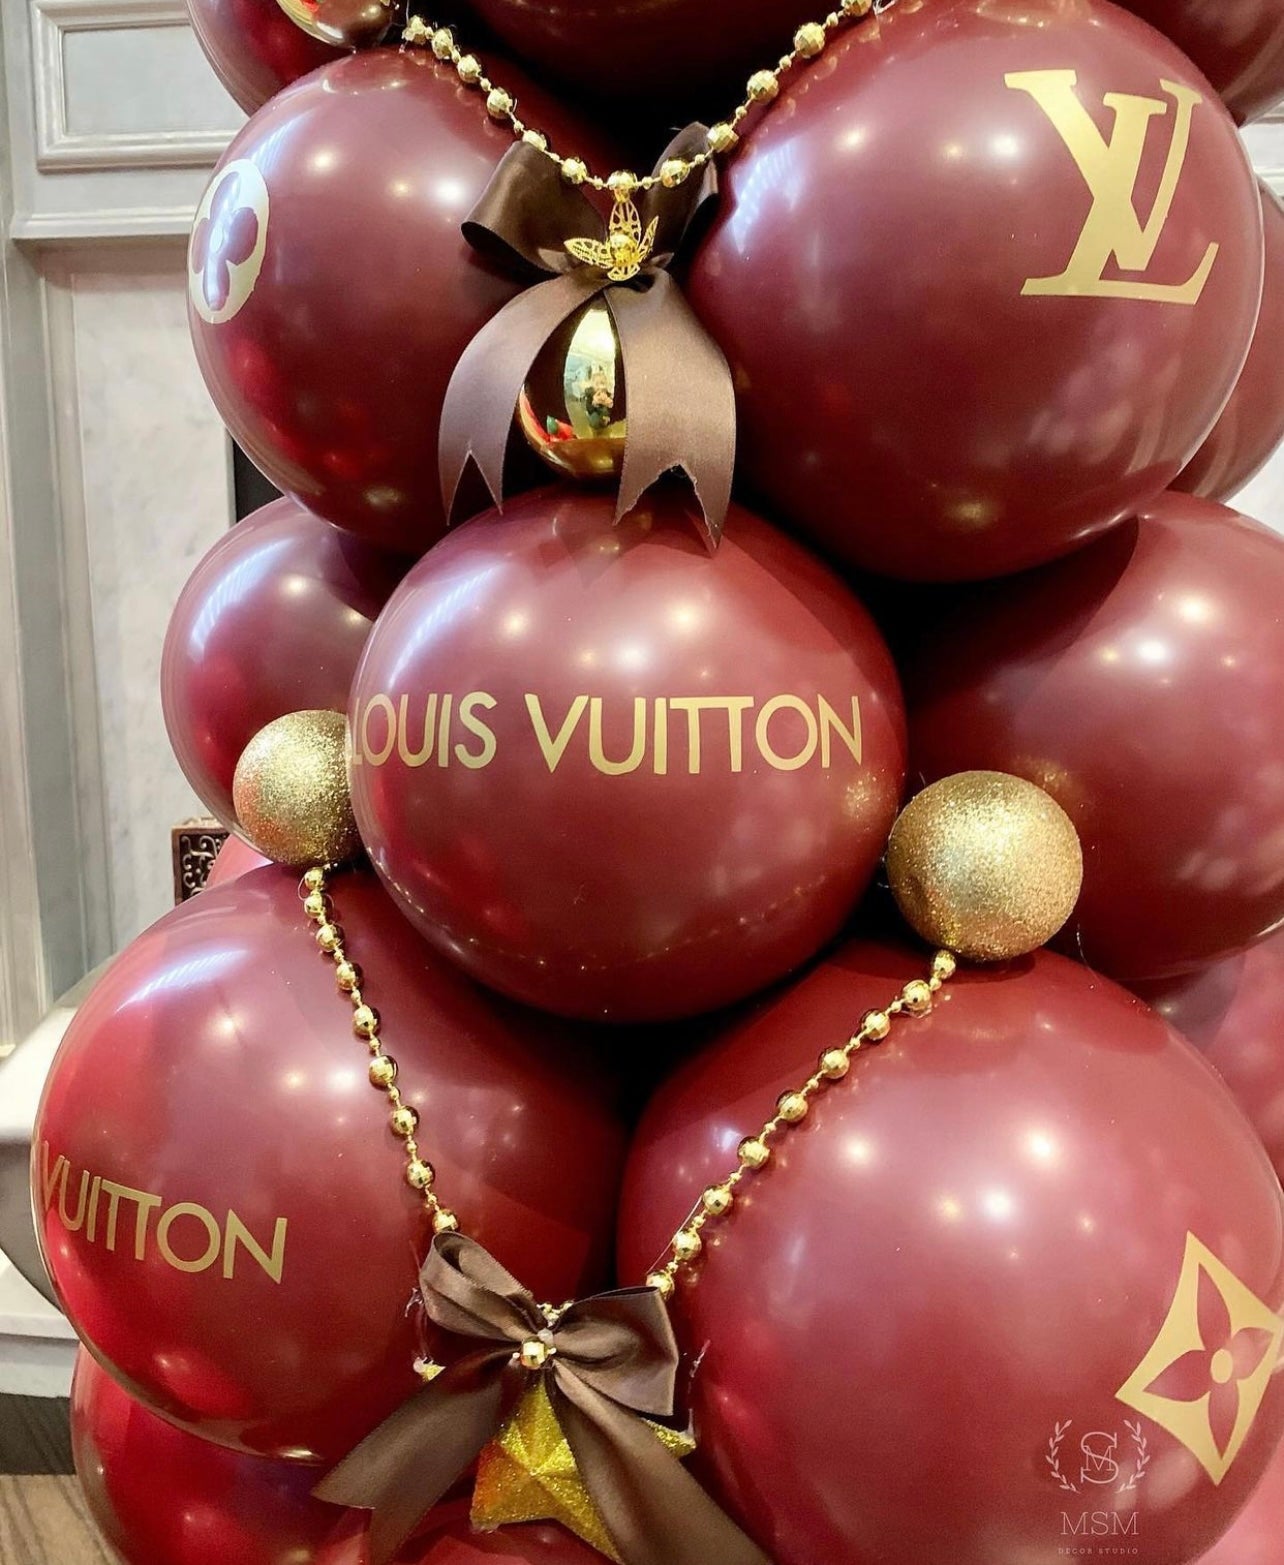 LOUIS VUITTON INSPIRED CHRISTMAS TREE FOR THE ONE AND ONLY